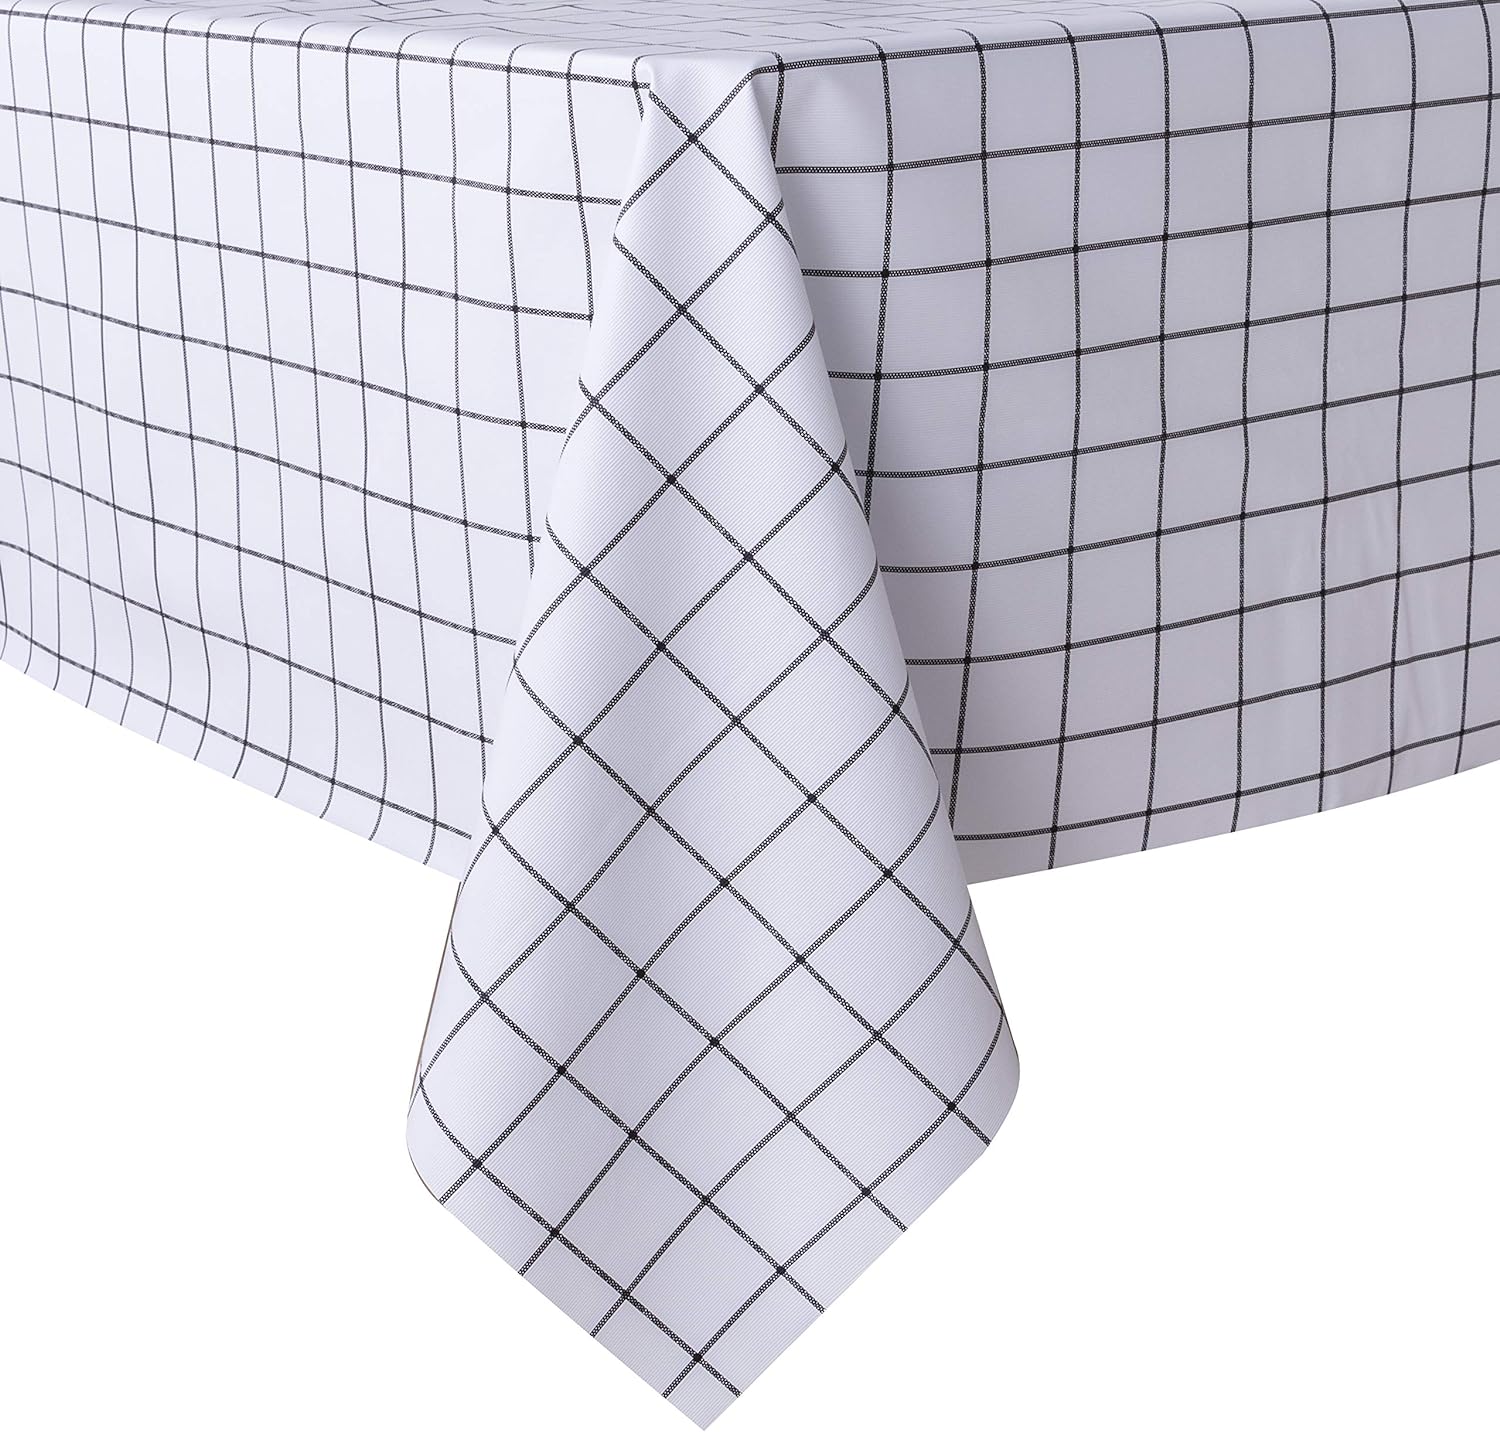 sancua Checkered Vinyl Rectangle Tablecloth - 54 x 78 Inch - 100% Waterproof Oil Proof Spill Proof PVC Table Cloth, Wipe Clean Table Cover for Dining Table, Buffet Parties and Camping, White Checkered